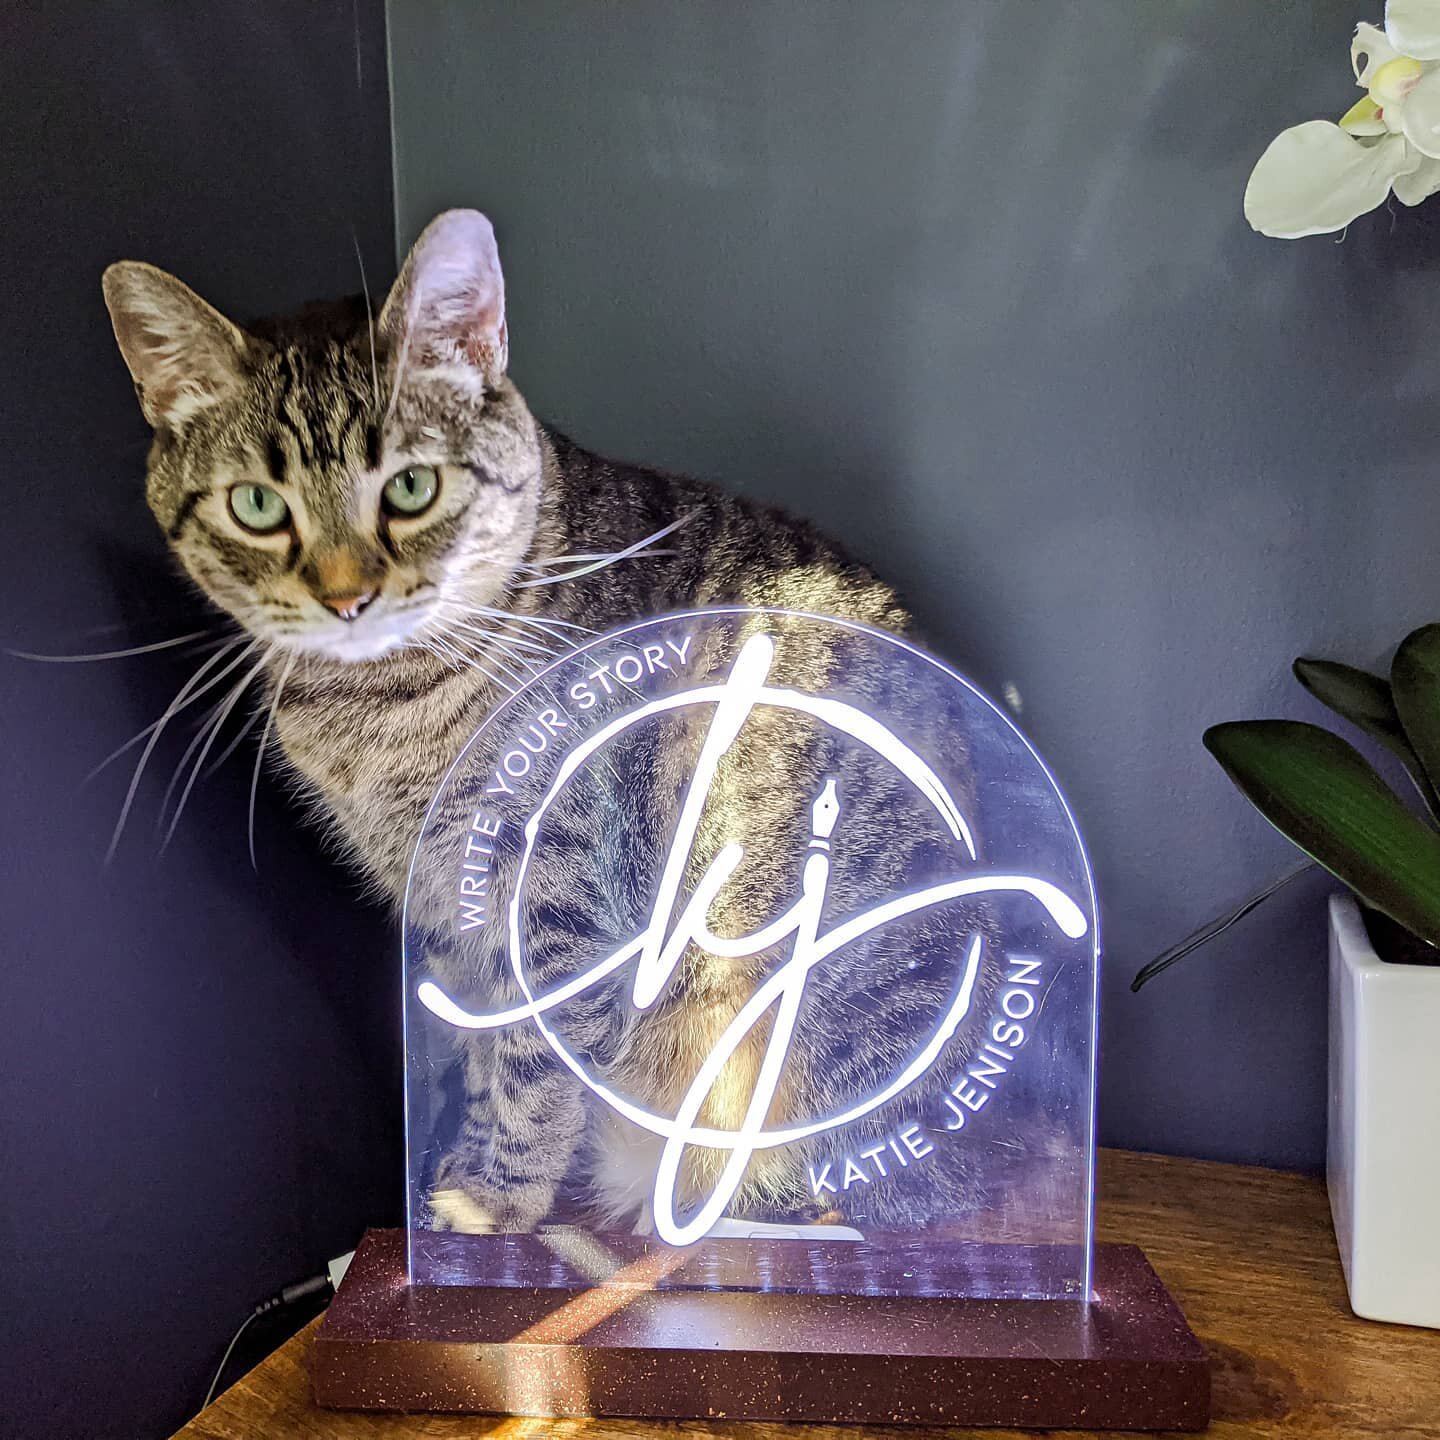 Got an amazing surprise from my favorite client not too long ago! @cyberdogzmarketing nailed it with this awesome light featuring my logo. I love it &mdash; and so does Boomer! 🐱 Thanks for the thoughtful gift @mabrevik!